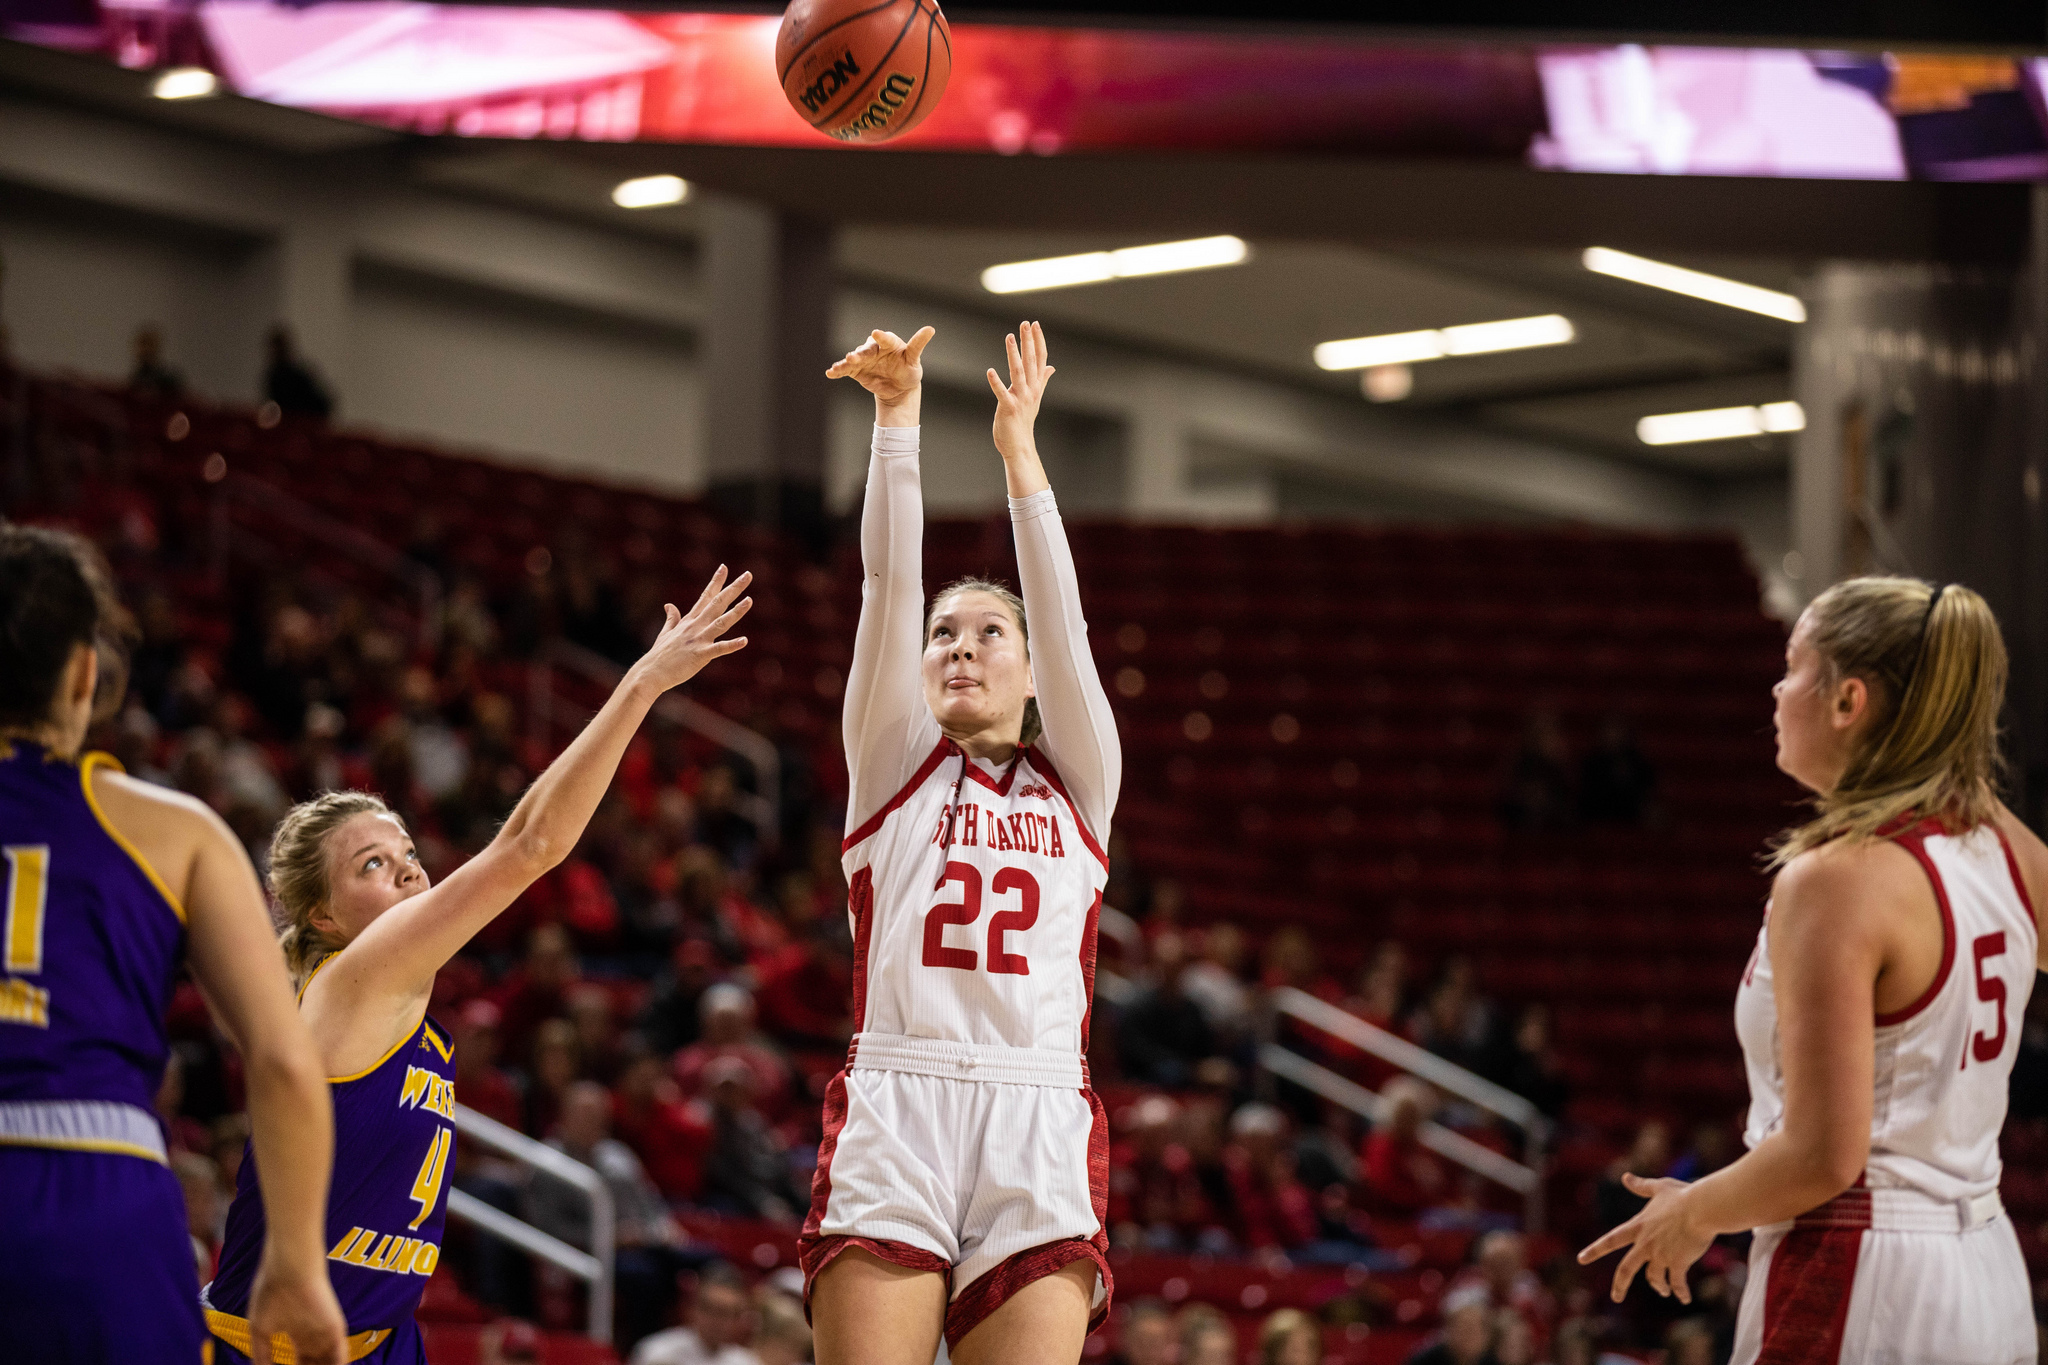 Coyotes top Leathernecks 92-49, win sixth straight